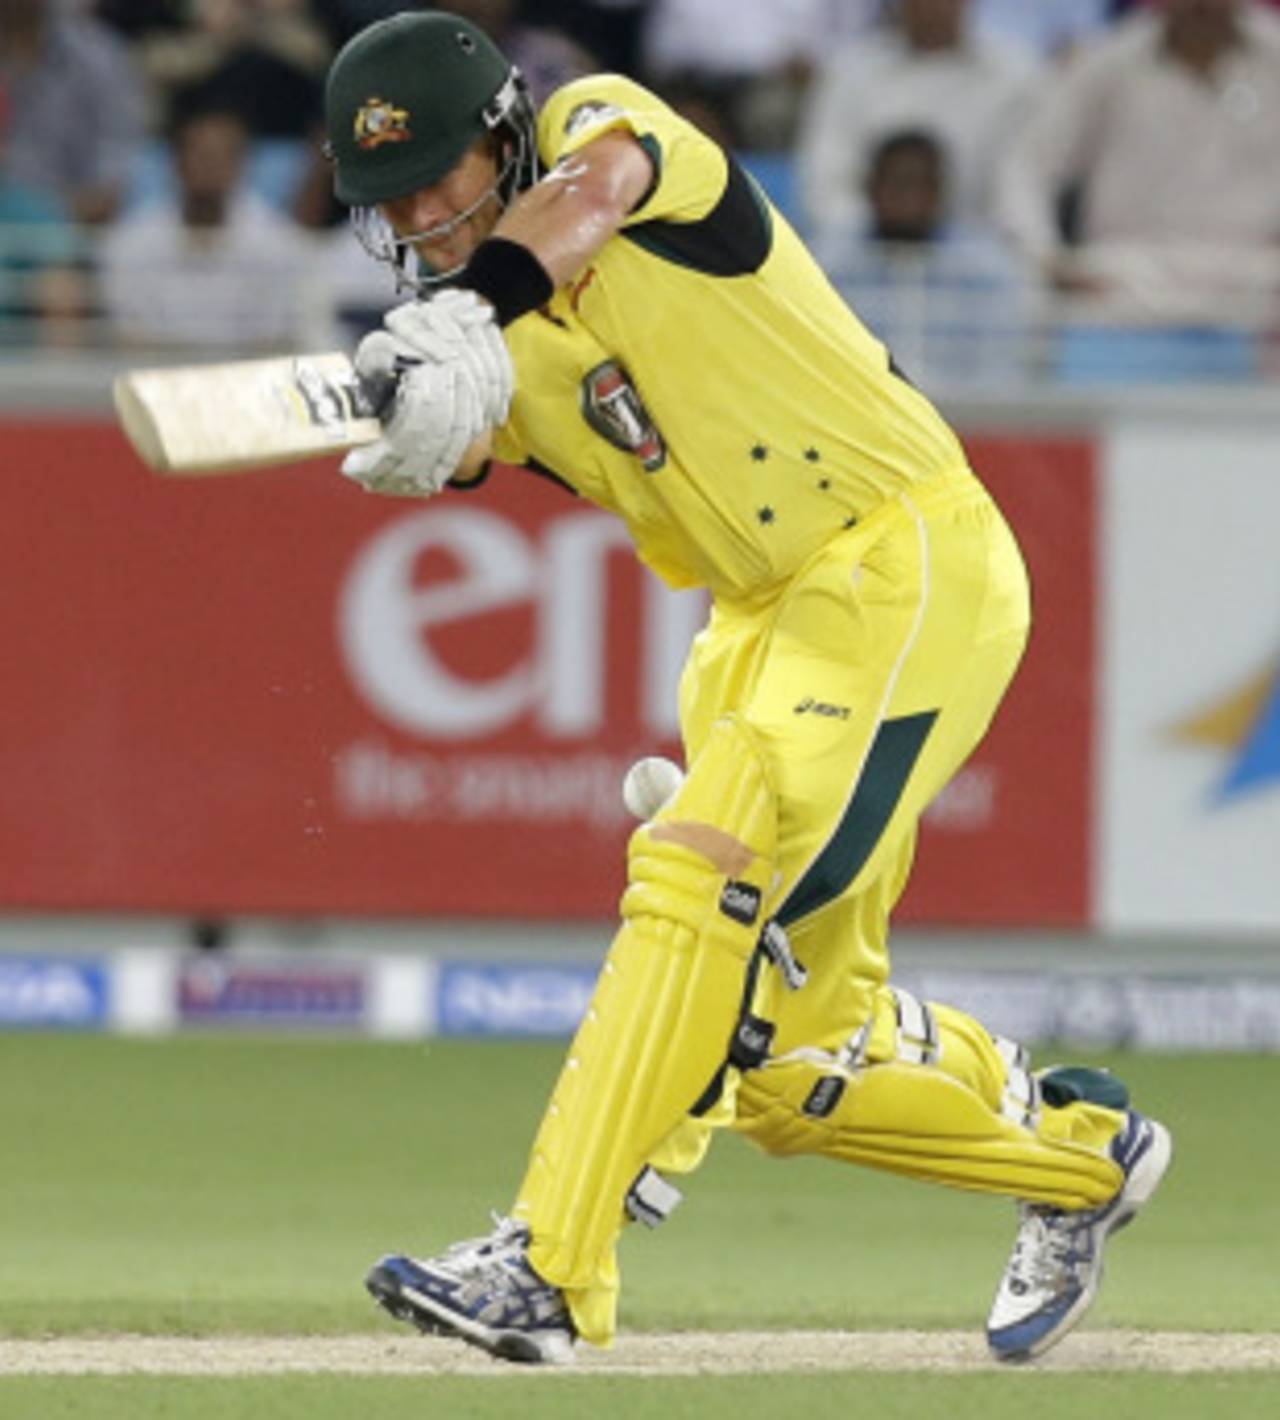 "I suppose, in batting there weren't positives there at all," Shane Watson said about Australia's performance in the first T20I&nbsp;&nbsp;&bull;&nbsp;&nbsp;Associated Press